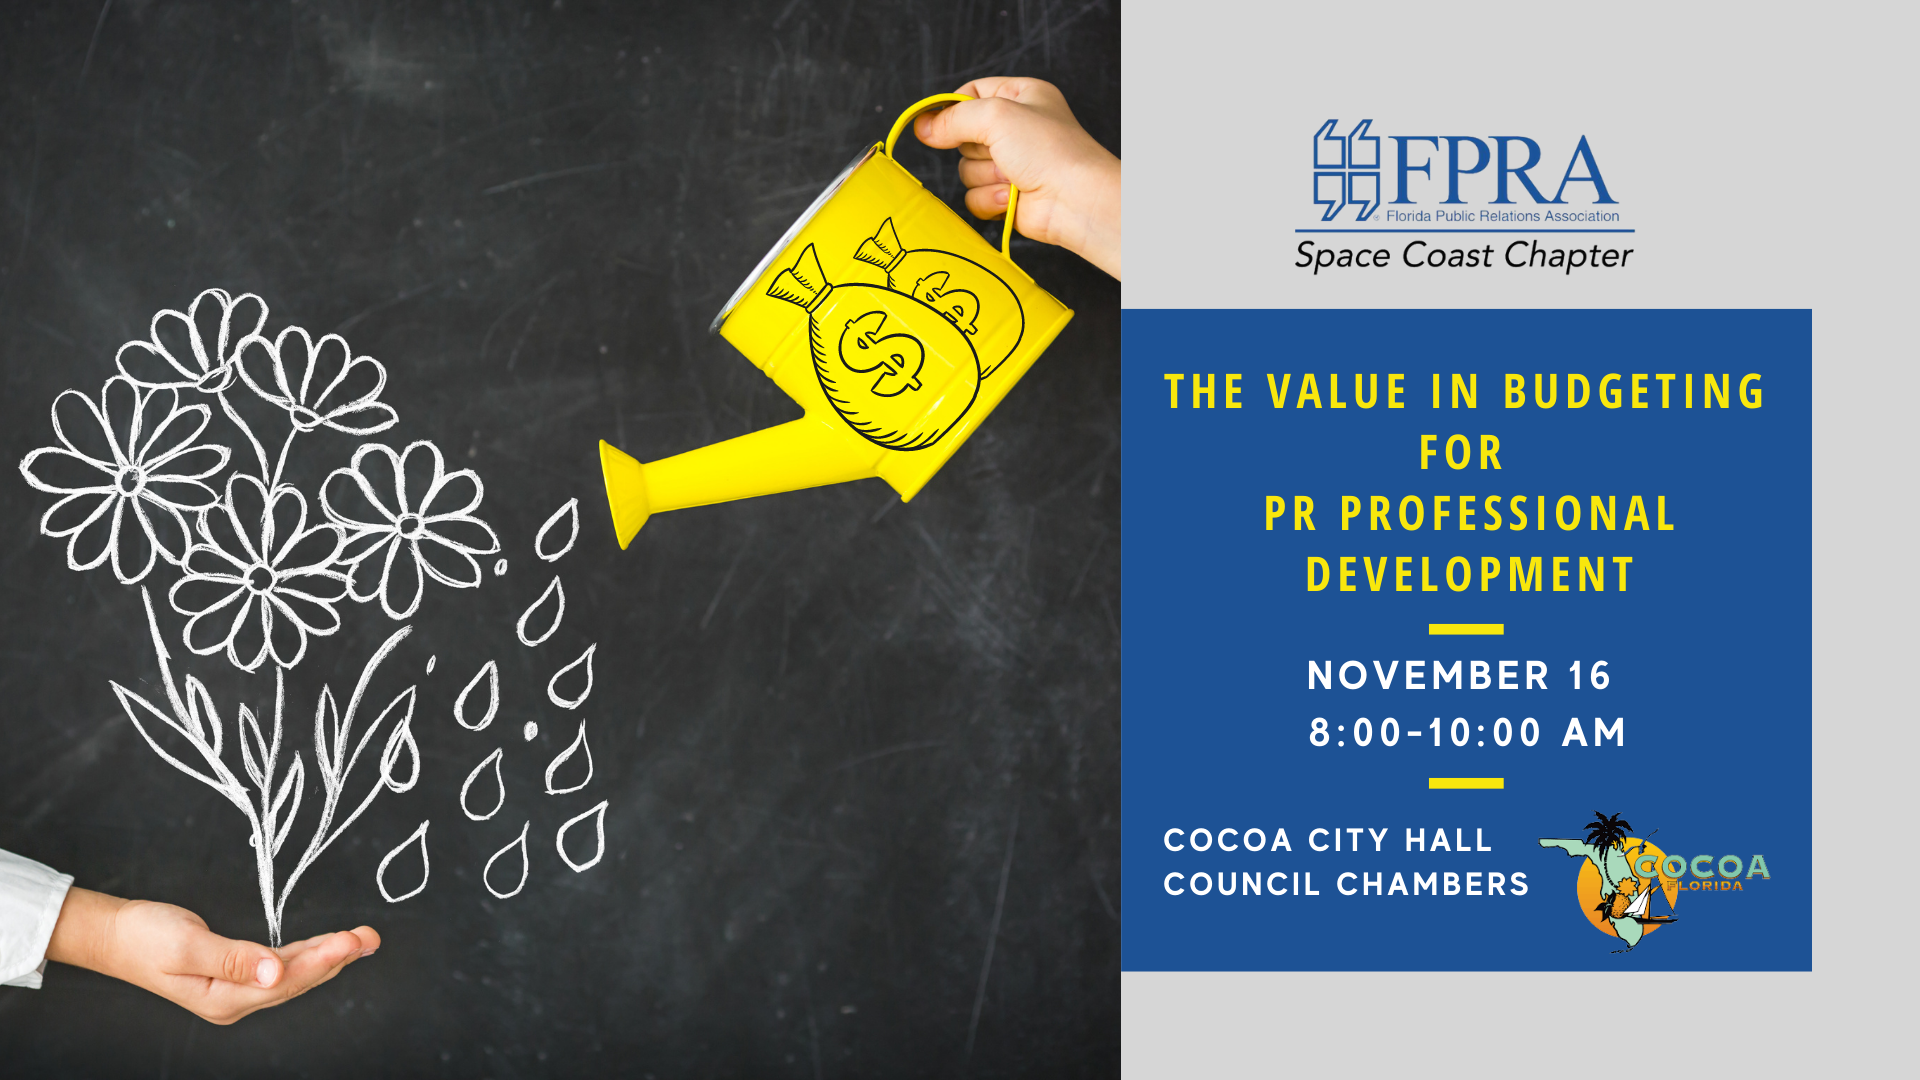 The Value in Budgeting for PR Professional Development